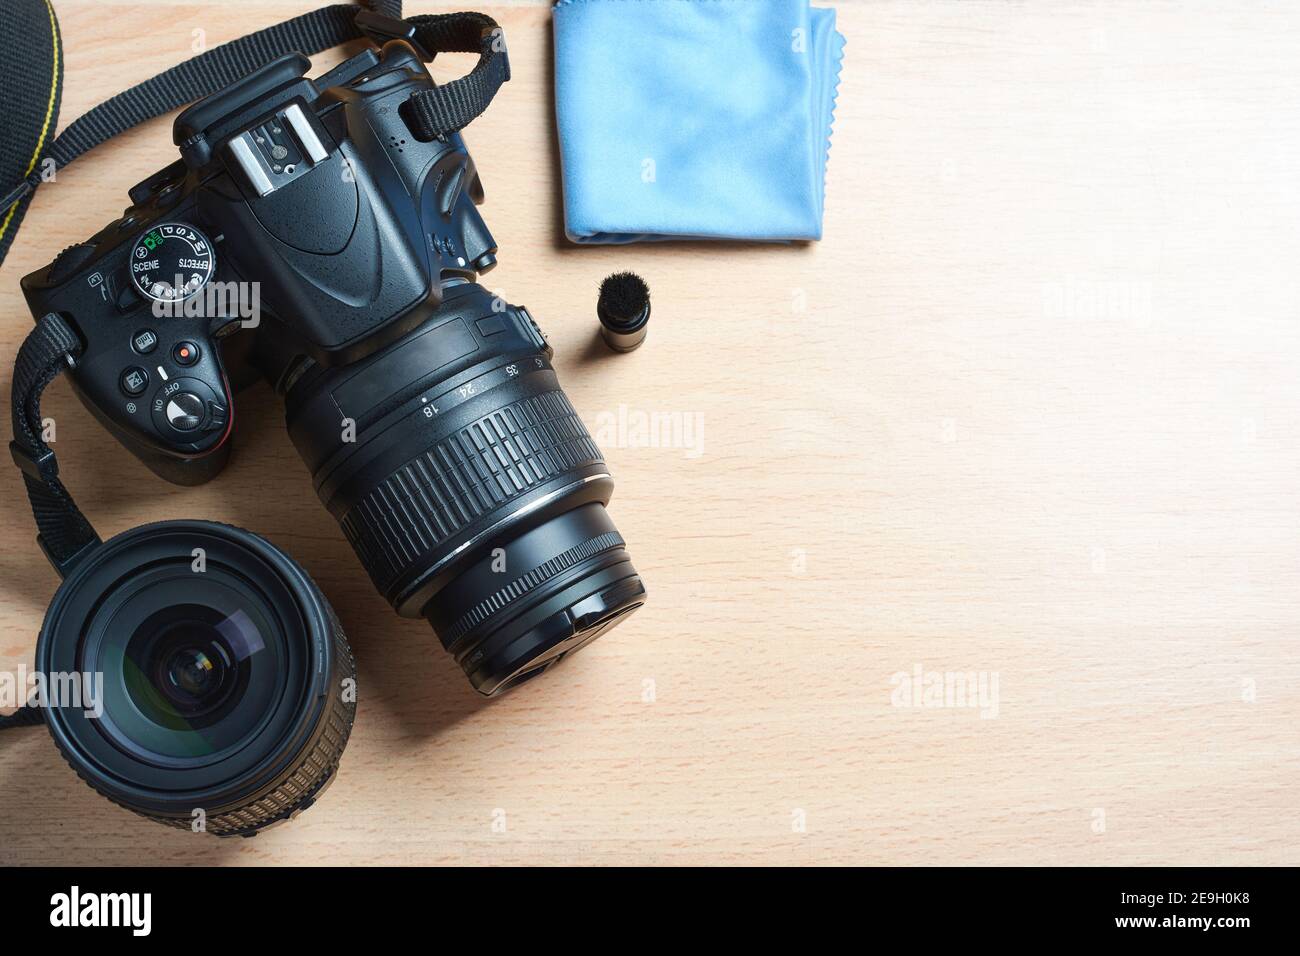 Top view of black digital camera, DSLR with lens, cleaning brush and cloth on wooden desktop with space for text. Stock Photo